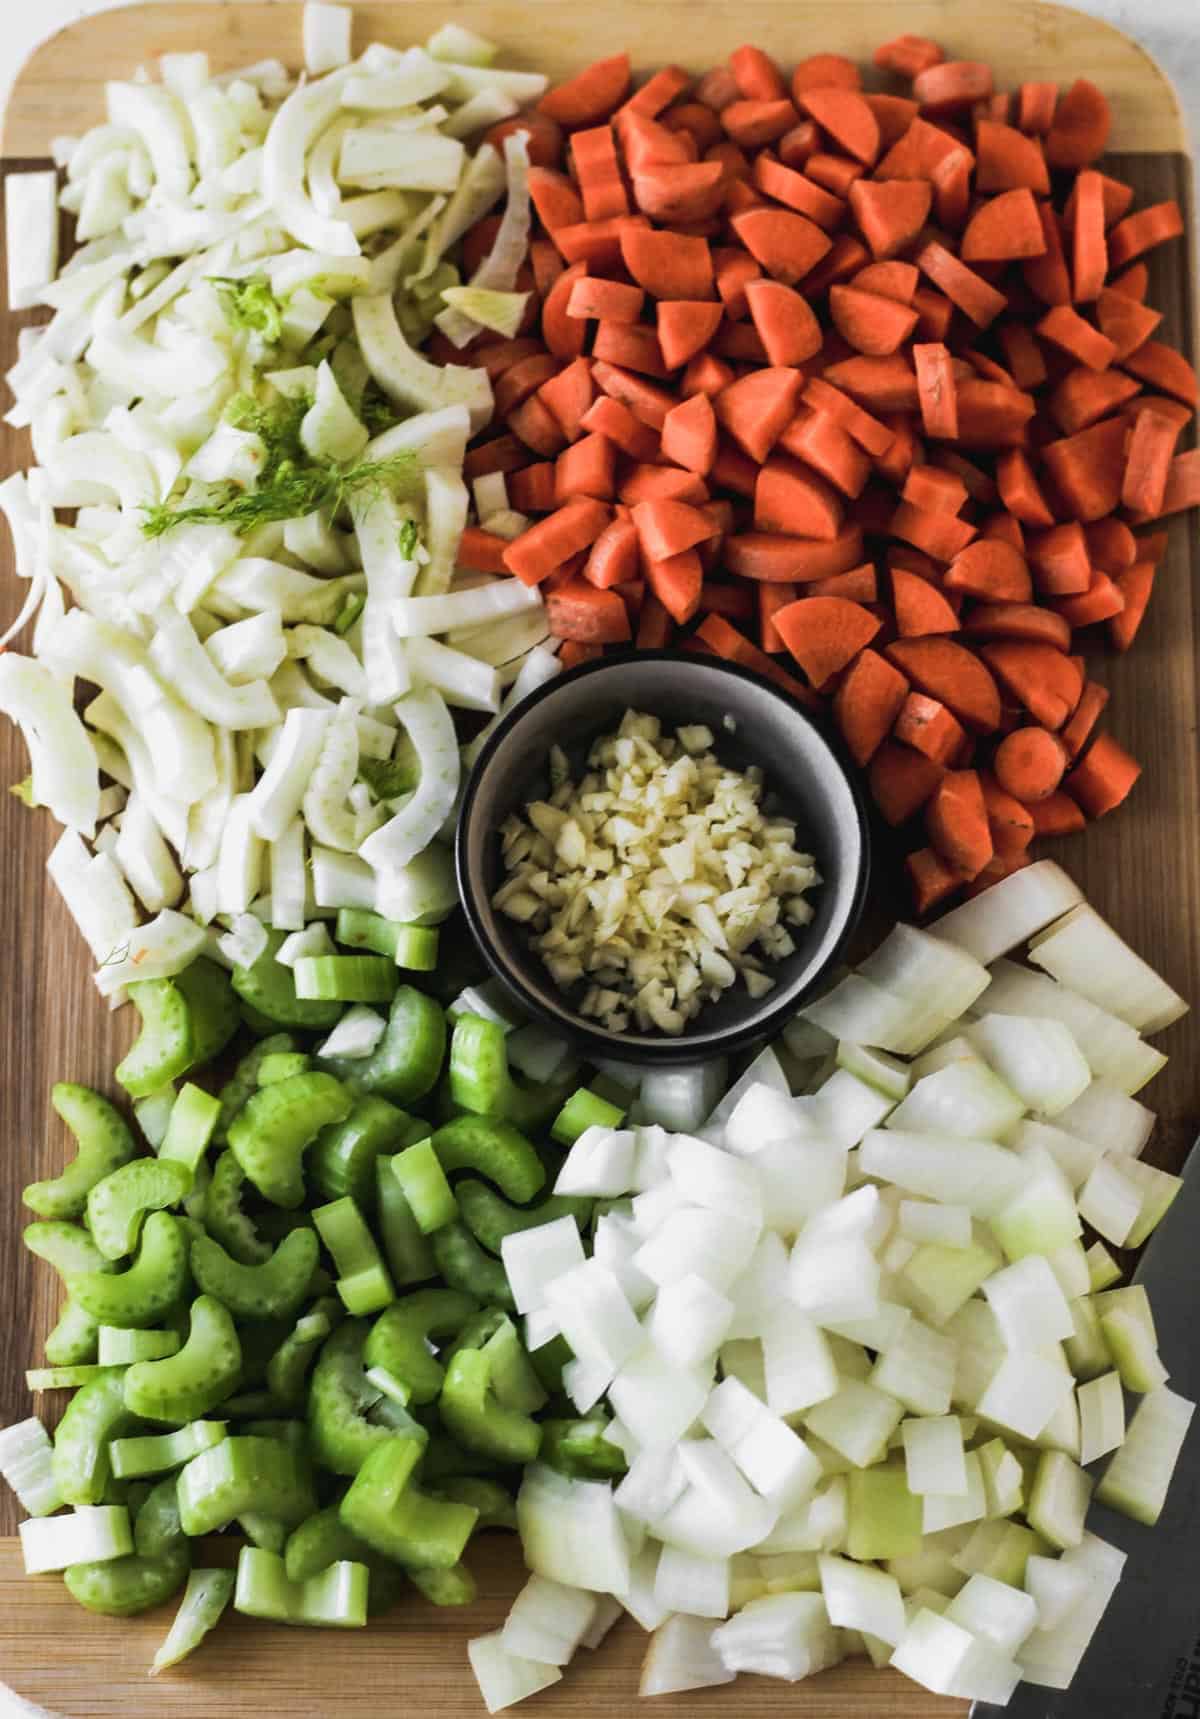 Chopped onions, sliced fennel, diced carrots and celery, and minced garlic on a wooden cutting board.